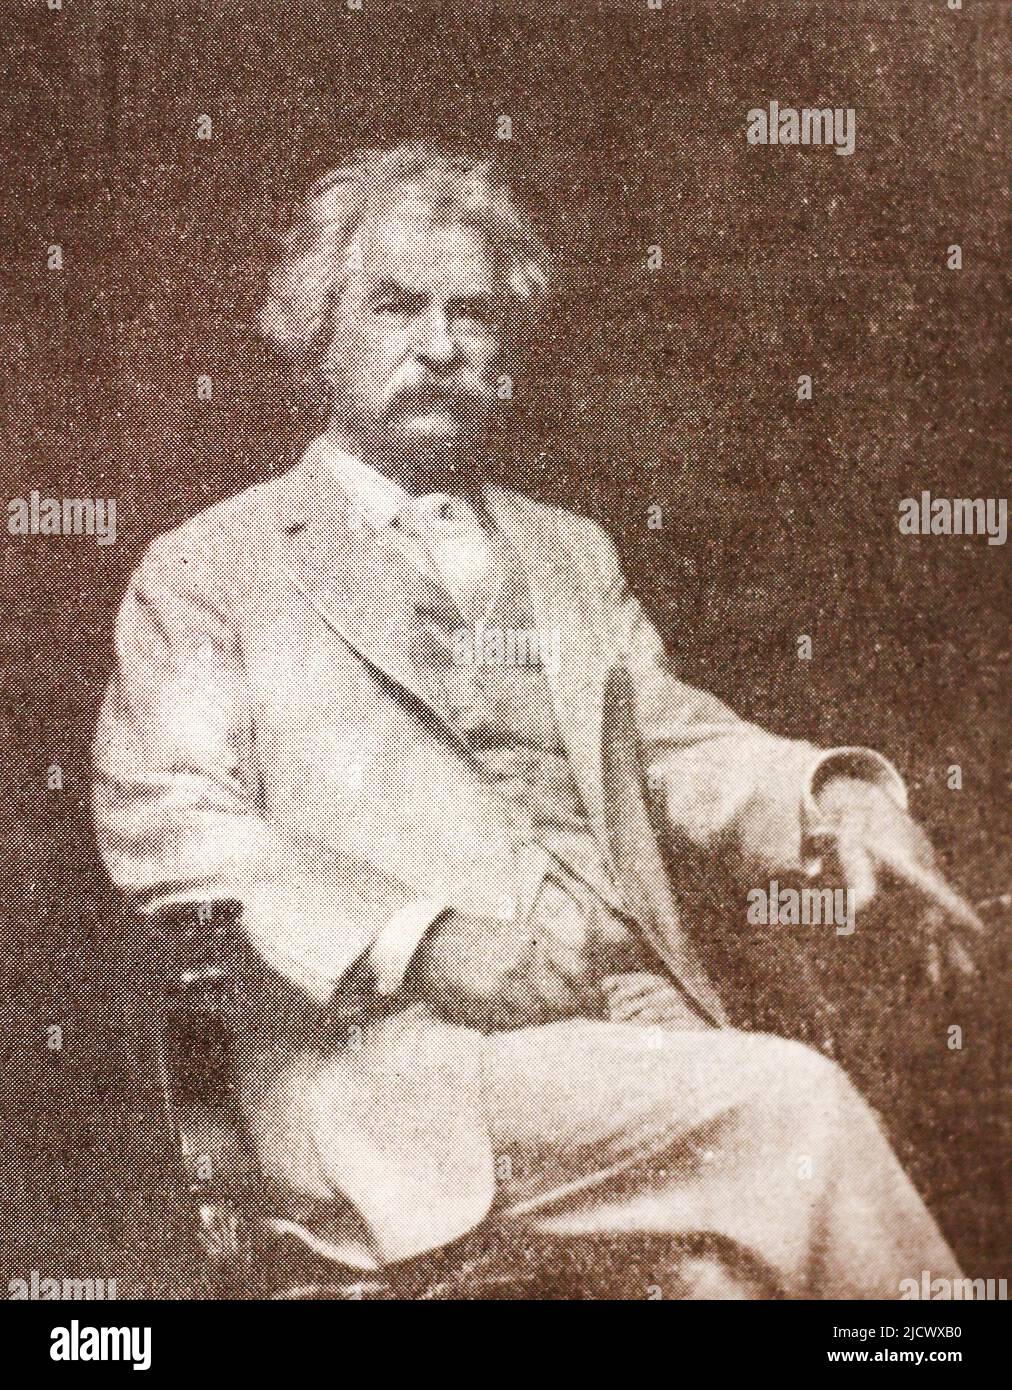 Portrait of Mark Twain. Samuel Langhorne Clemens (1835 – 1910), known by his pen name Mark Twain, was an American writer, humorist, entrepreneur, publisher, and lecturer. He was lauded as the 'greatest humorist the United States has produced', and William Faulkner called him 'the father of American literature'. His novels include The Adventures of Tom Sawyer (1876) and its sequel, Adventures of Huckleberry Finn (1884), the latter of which has often been called the 'Great American Novel'. Stock Photo